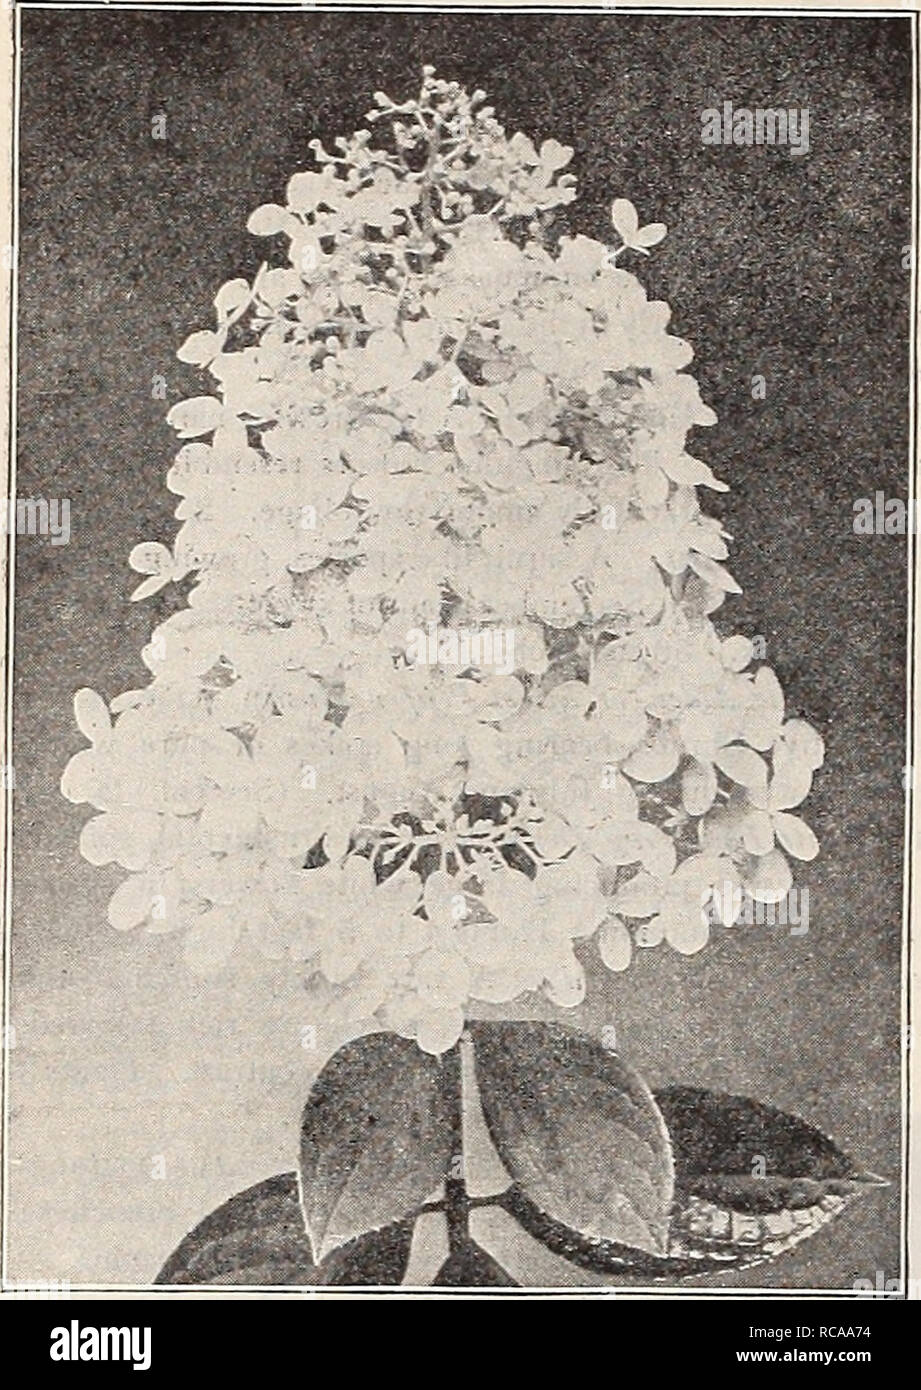 . Dreer's 1907 garden book. Seeds Catalogs; Nursery stock Catalogs; Gardening Equipment and supplies Catalogs; Flowers Seeds Catalogs; Vegetables Seeds Catalogs; Fruit Seeds Catalogs. Hydrangea Paniculata Grandiflora. plena. A tine double white Deutzia Candidissima 25 cts. each. â Crenata rosea plena {Double-flowering Deutzia). Double-white, tinged with pink ; very desirable. 25 cts. each. â Gracilis. A favorite dwarf bush, covered with spikes of pure white flowers in early summer. 25 cts. each ; $2.50 per doz. Campanulata. A new white sort, with large, open, salver-shaped flowers. 25 cts. eac Stock Photo